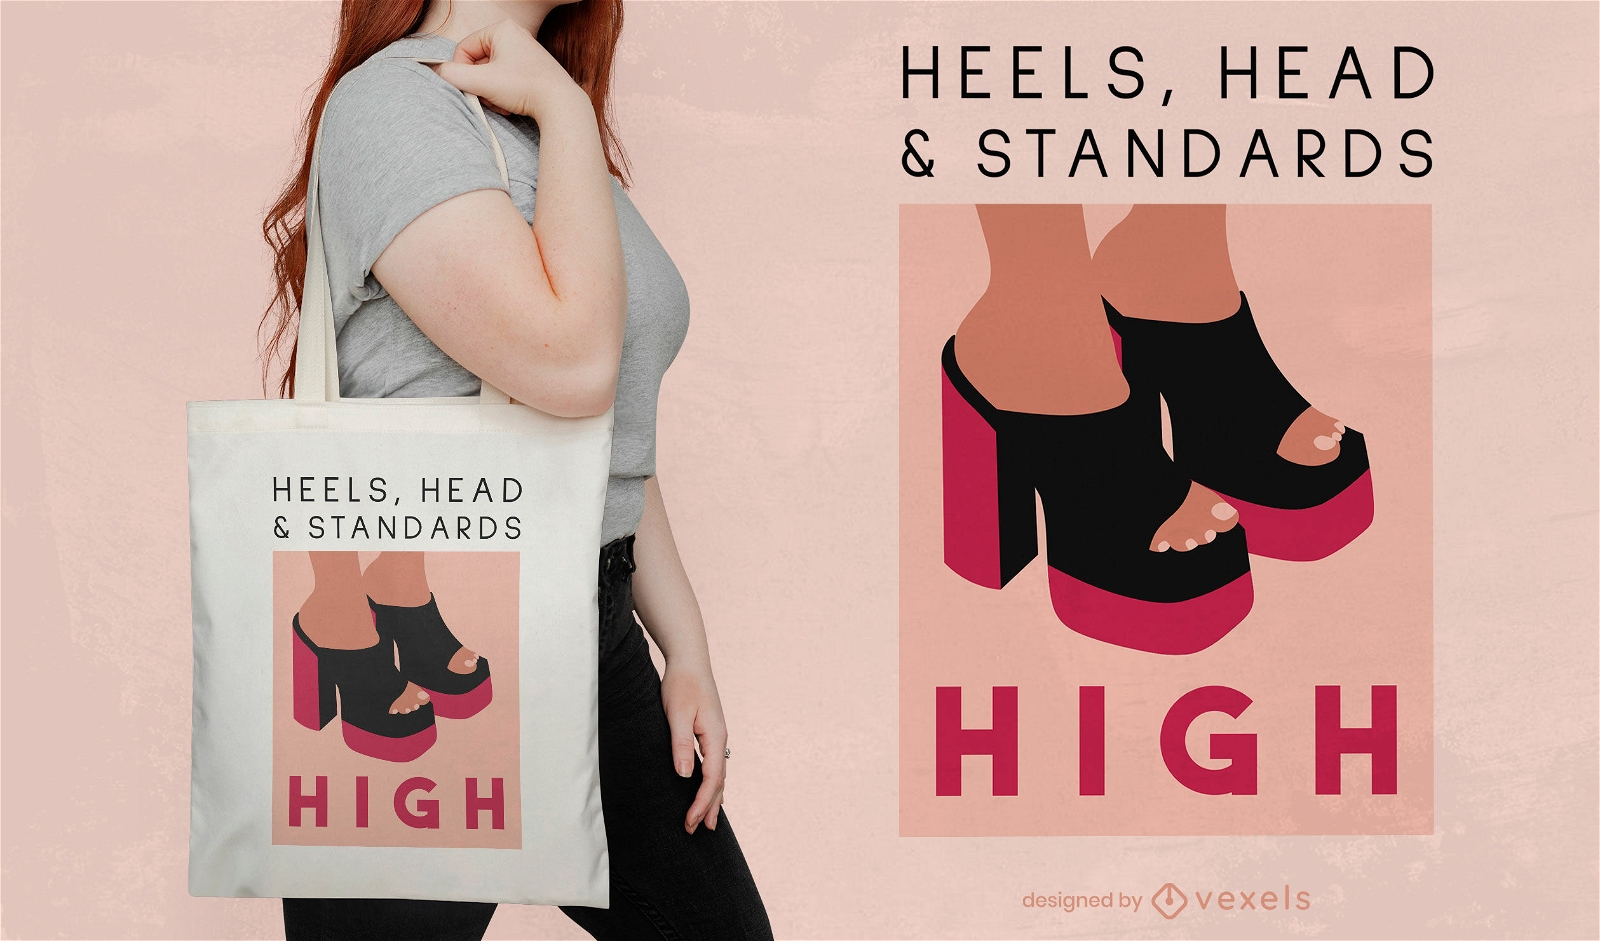 High heels quote tote bag design